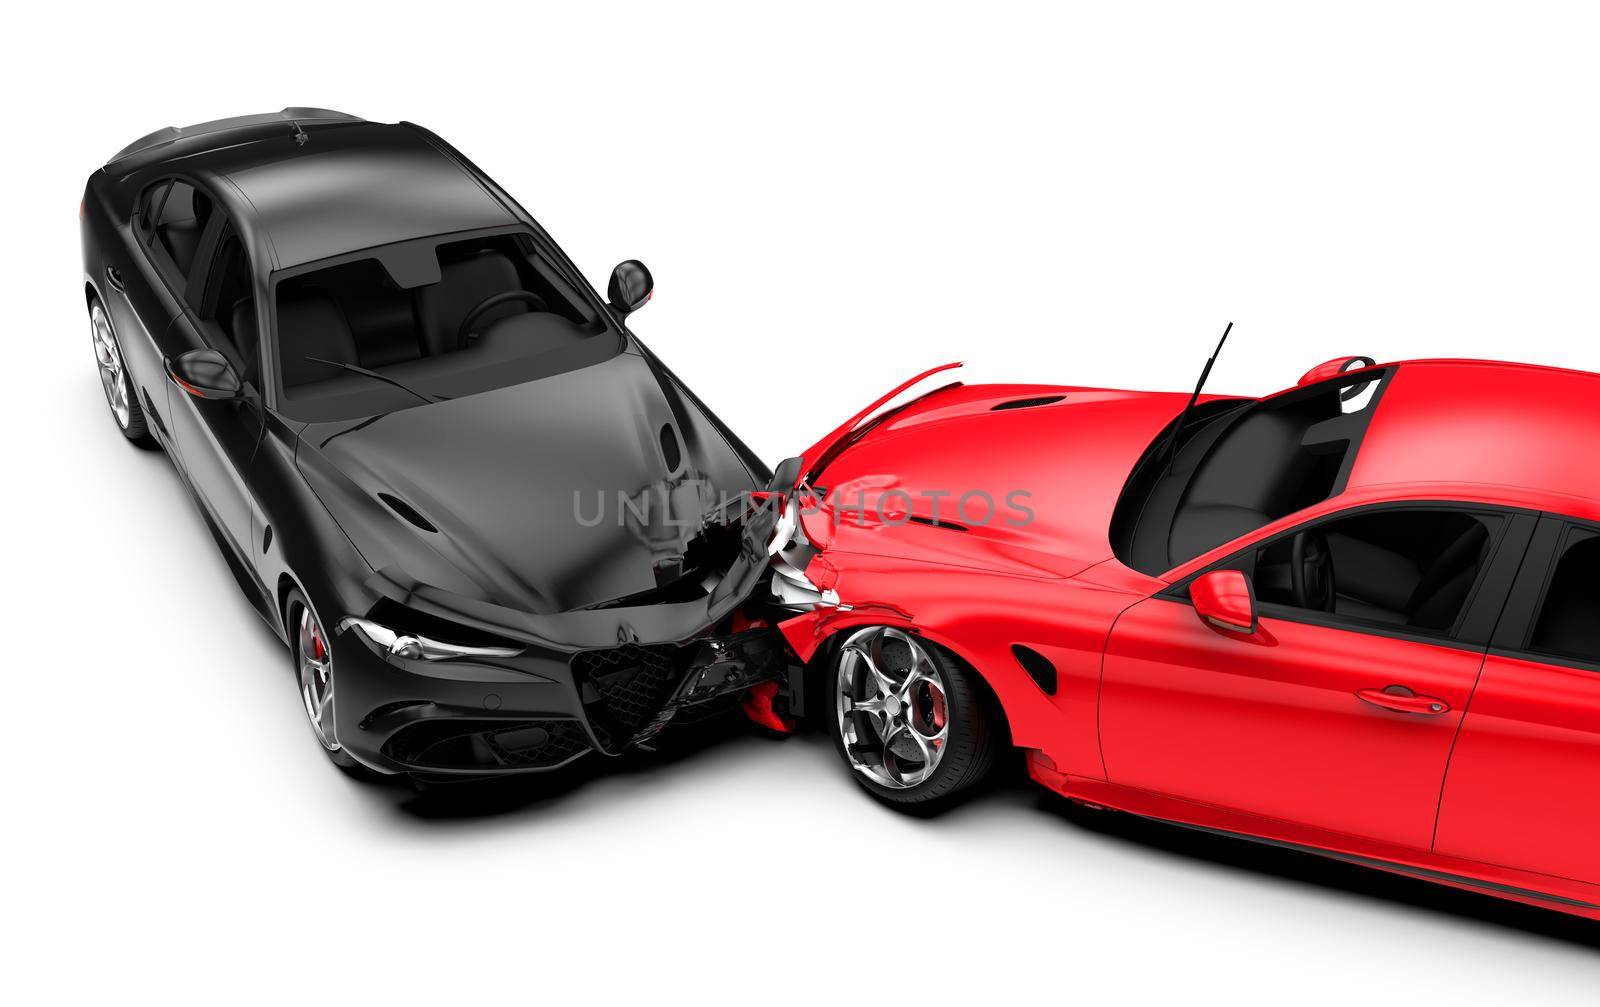 Accident between two cars, one red and one black, isolated on white, top view: 3D illustration